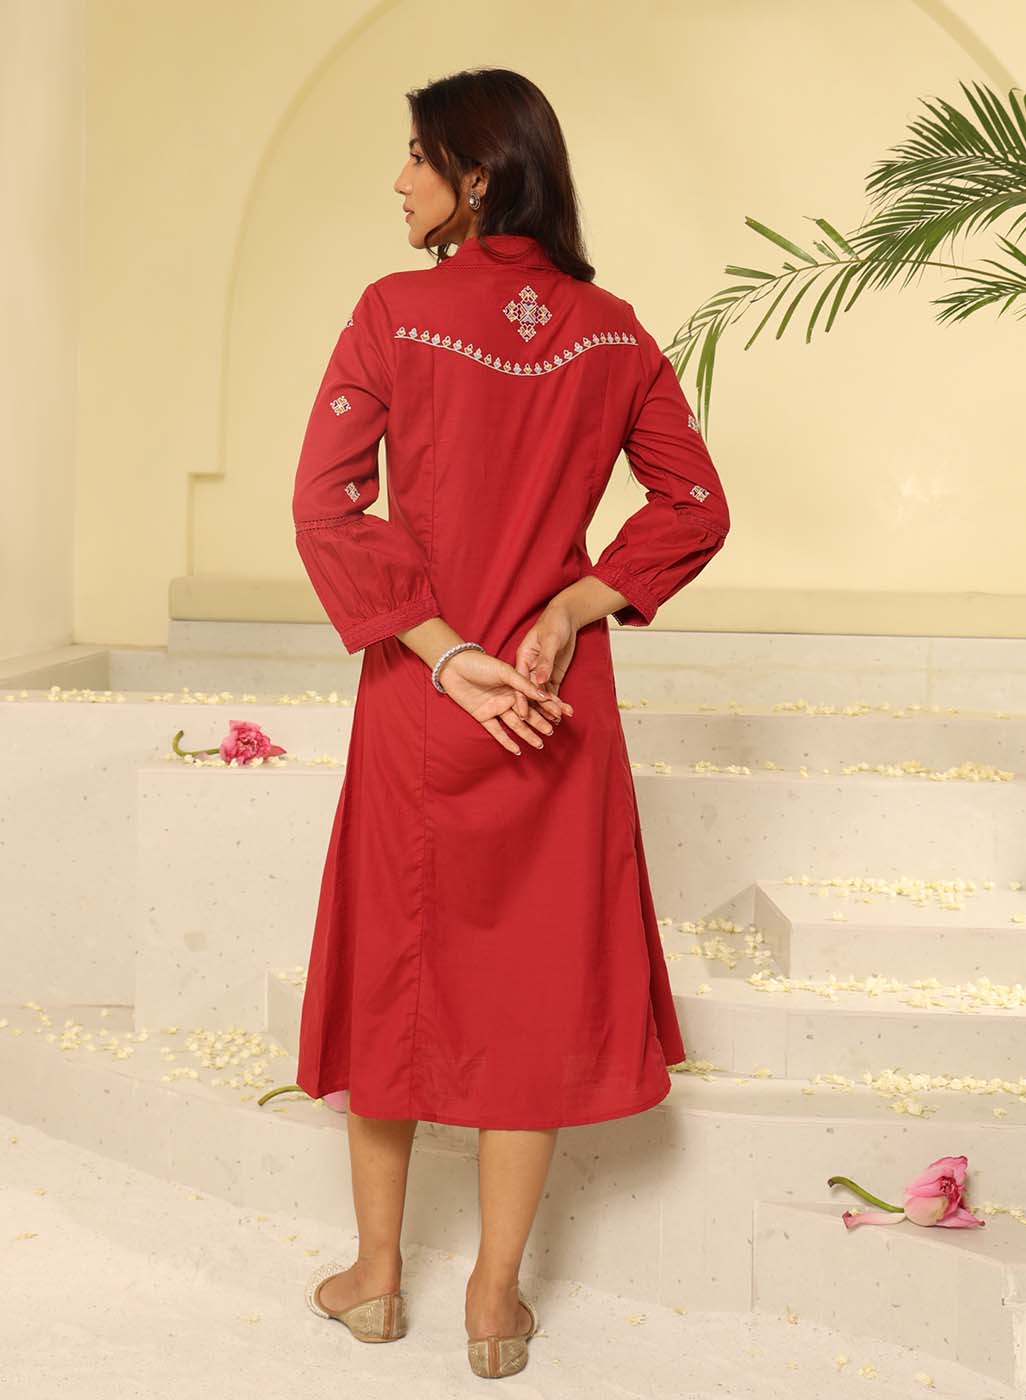 Indo Era White & Red Floral Embroidered Ethnic A-Line Midi Dress Price in  India, Full Specifications & Offers | DTashion.com